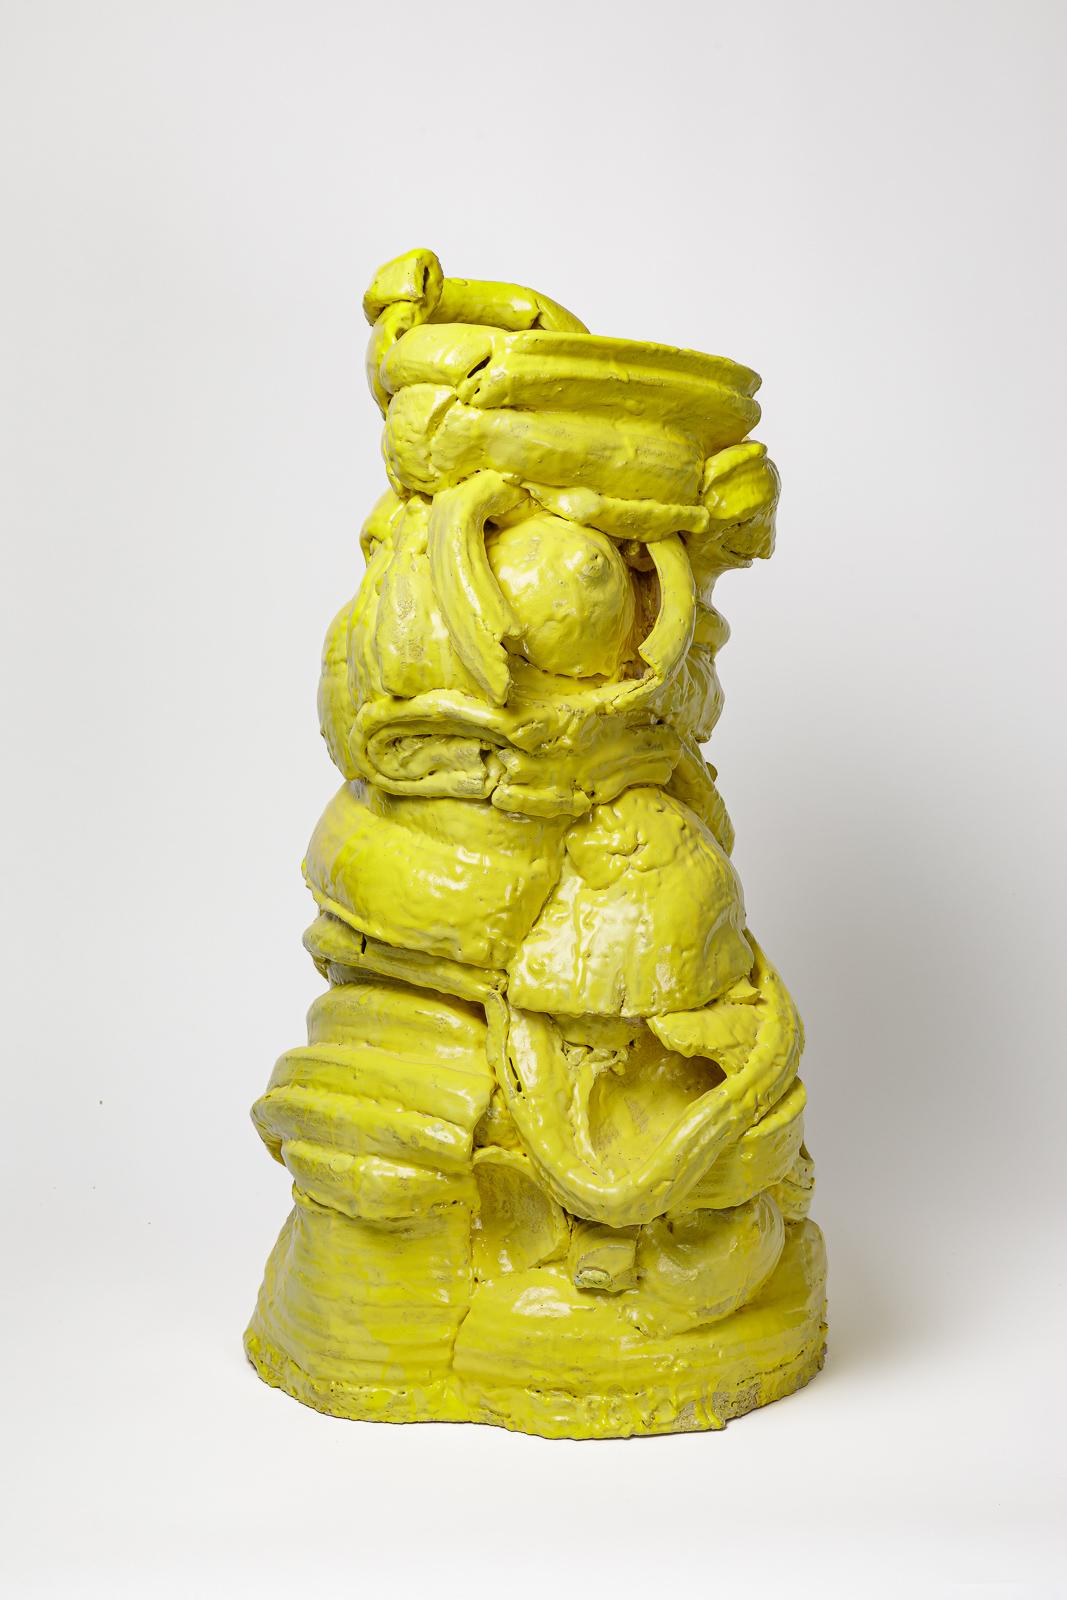 French Large floor vase in yellow glazed ceramic by Patrick Crulis, 2023.